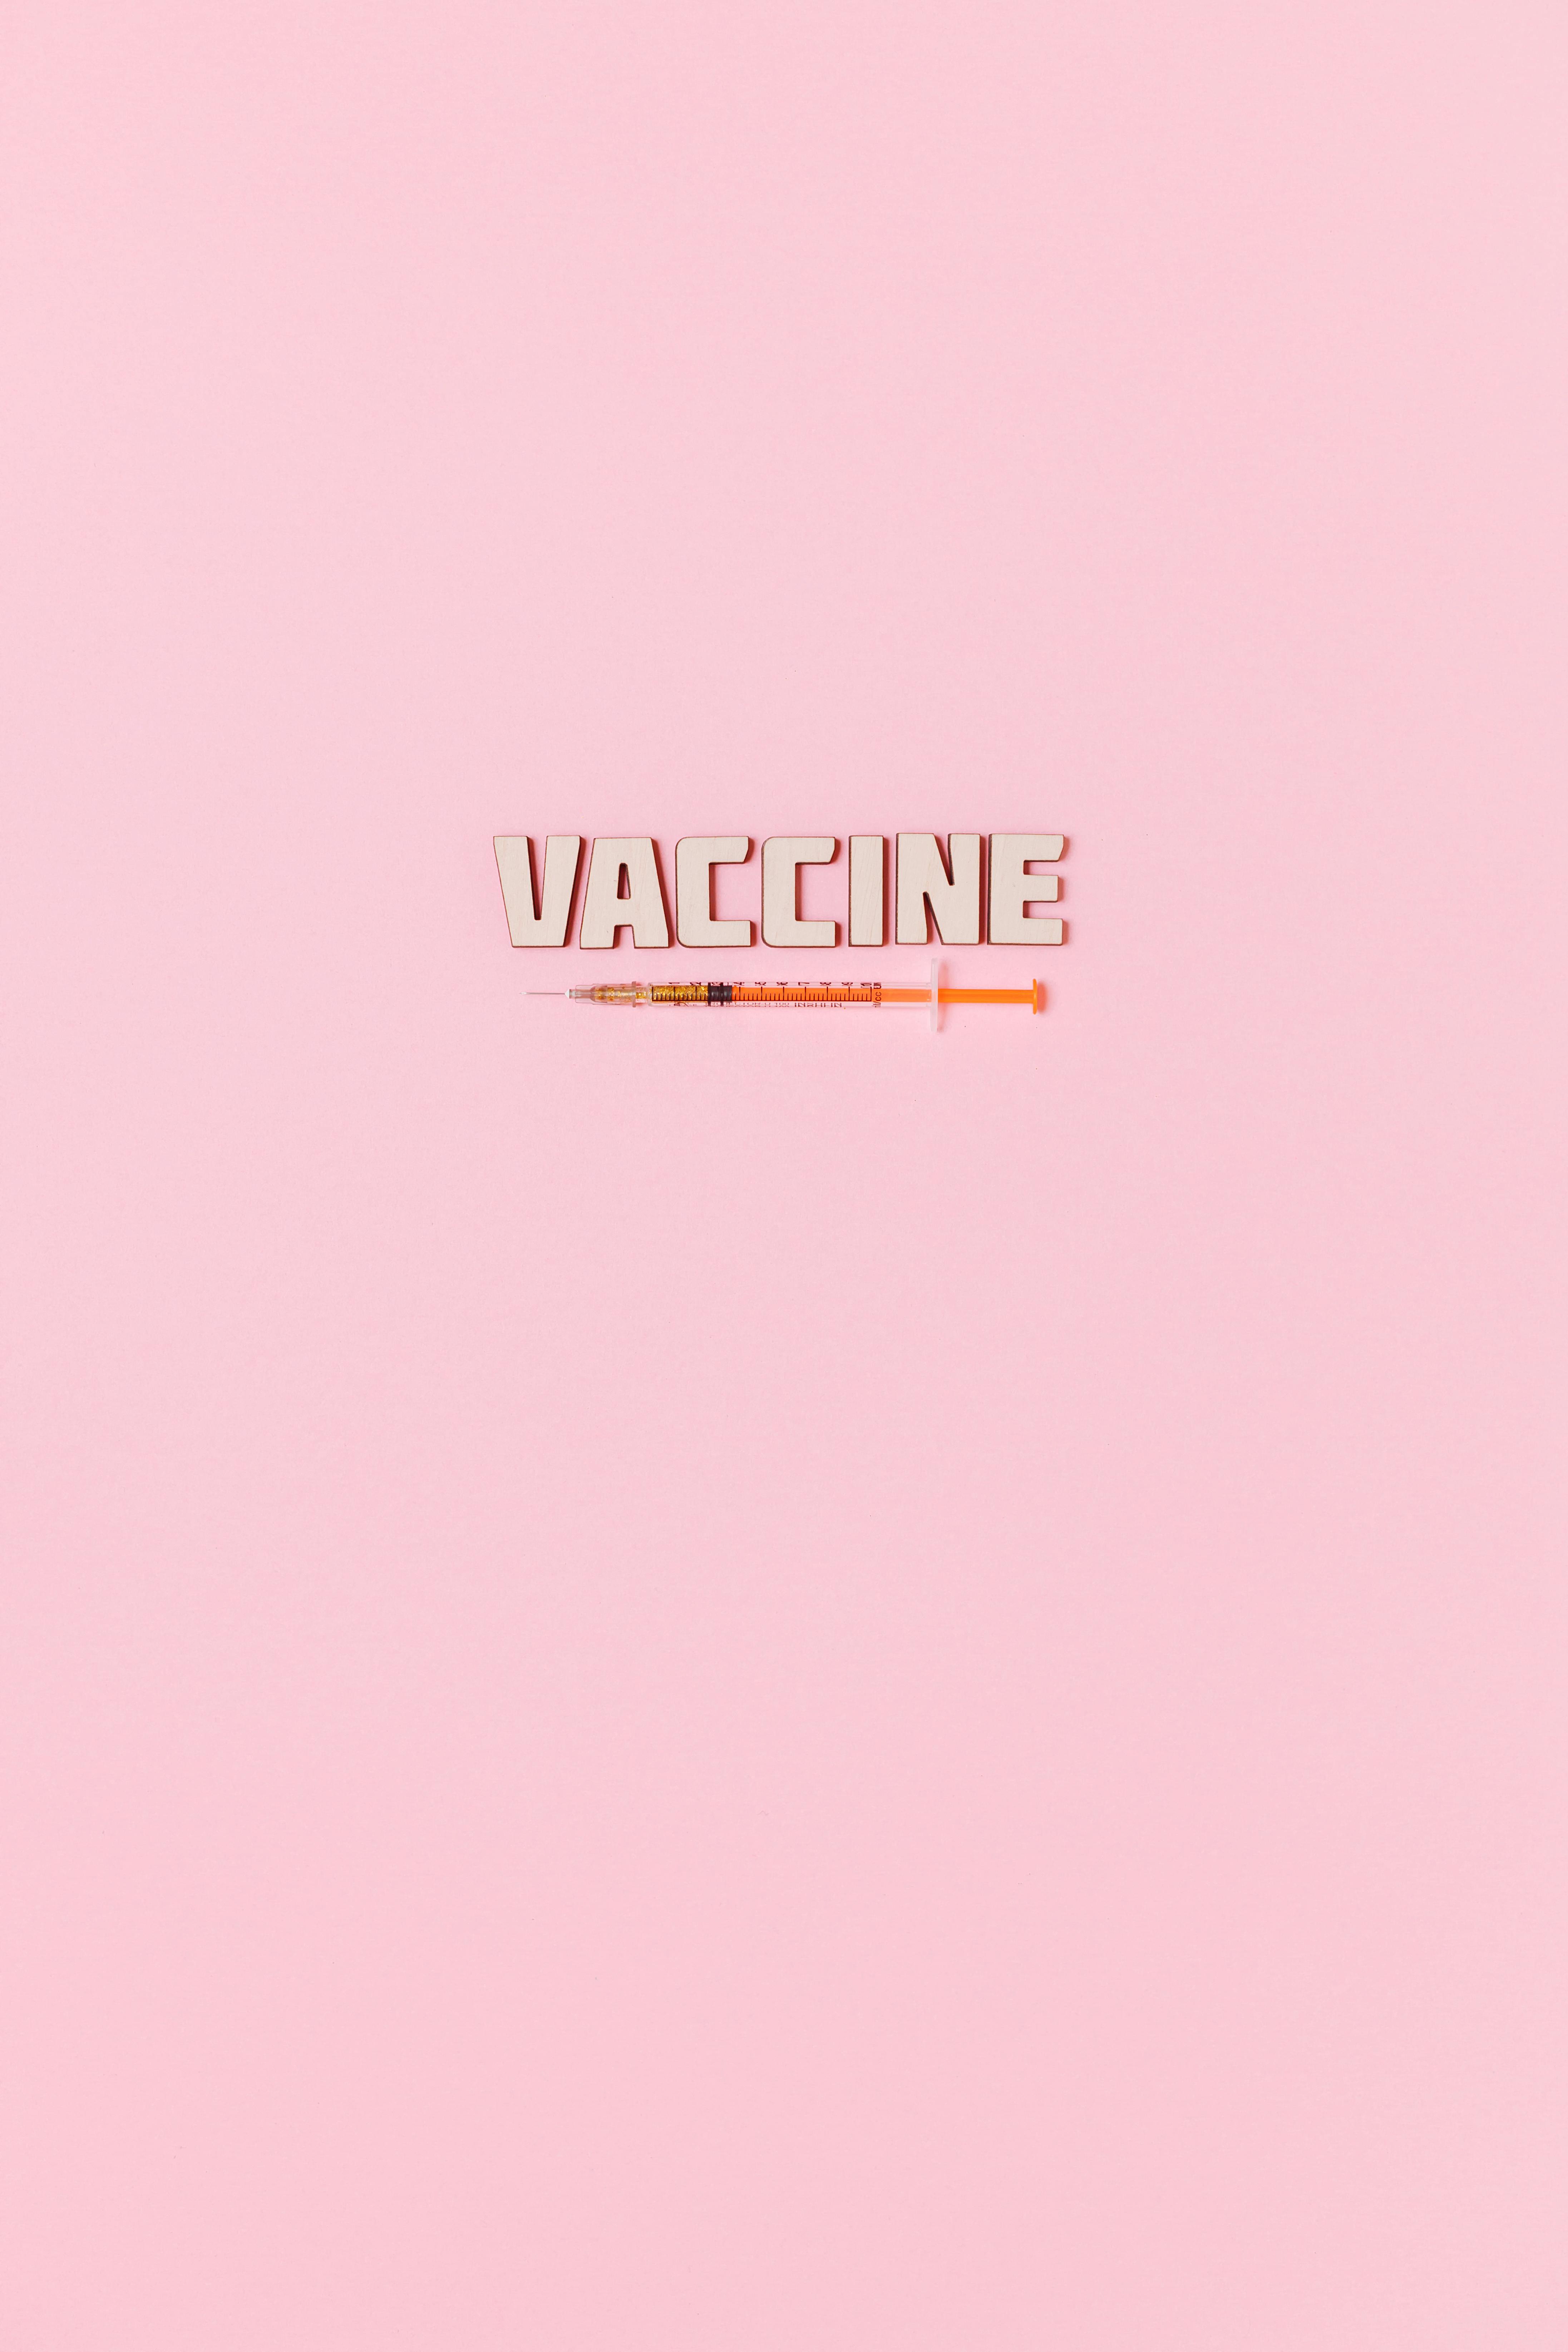 a syringe and vaccine text on pink background